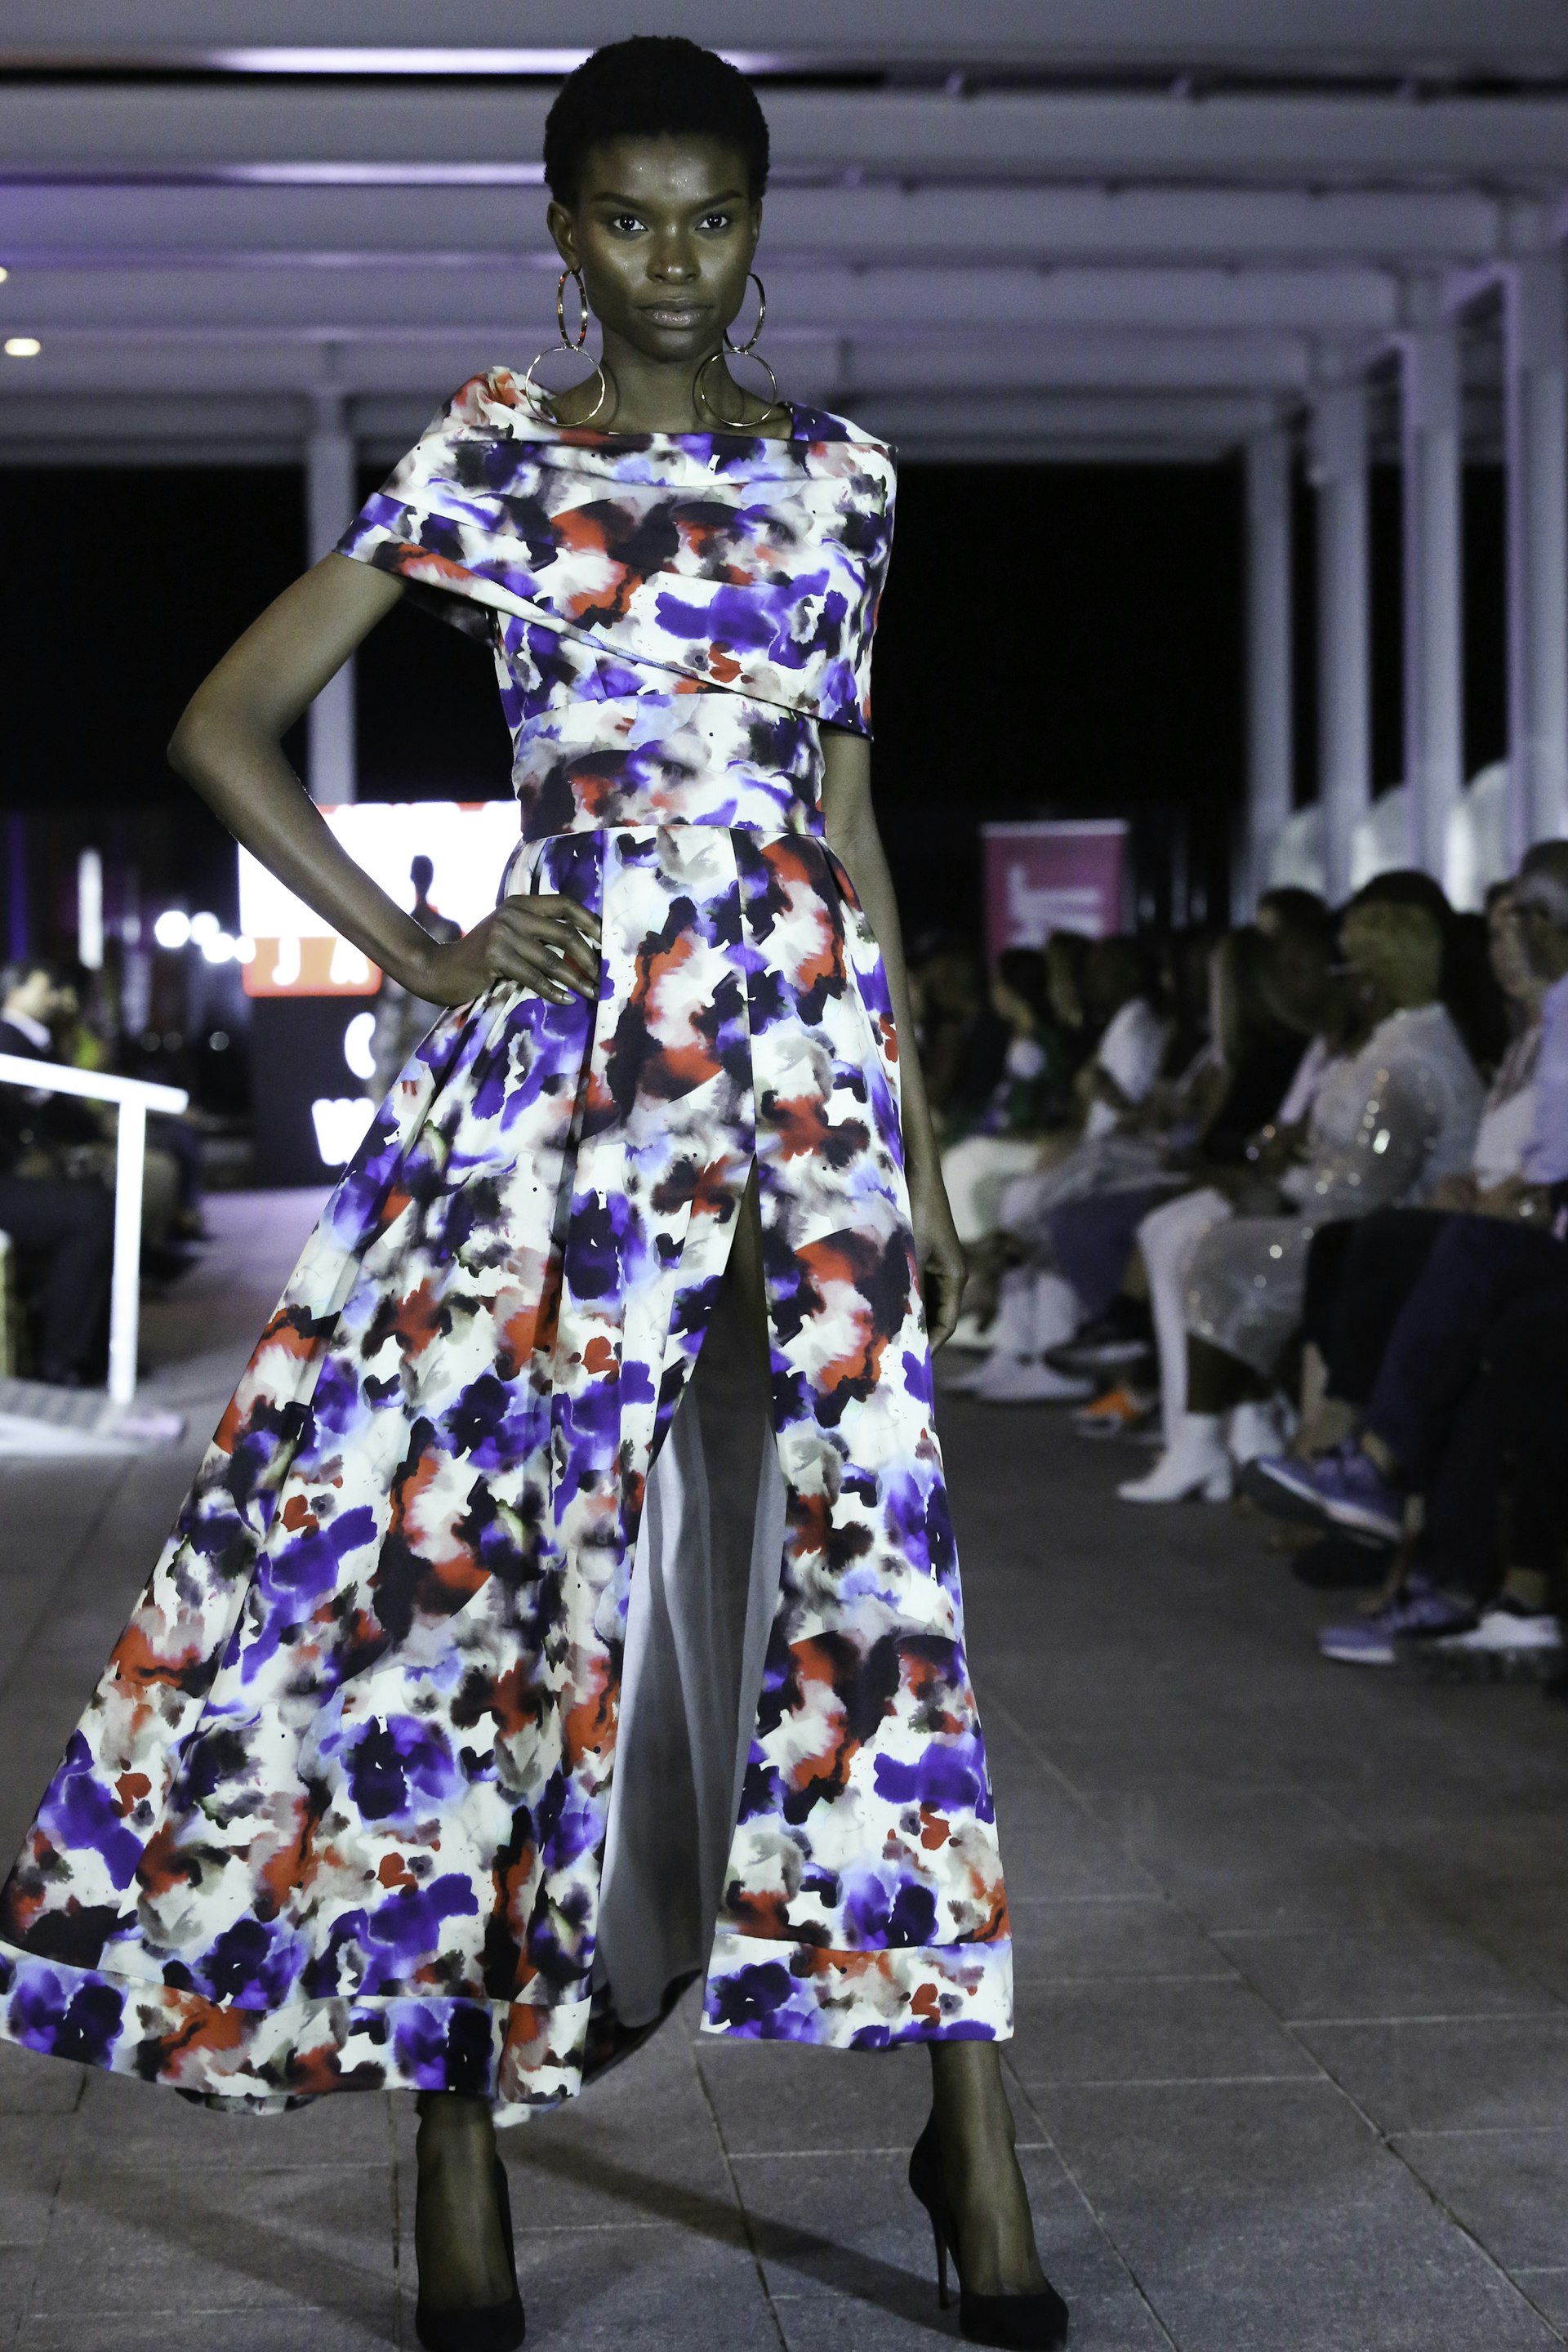 A model walks down a catwalk wearing a colorful dress with black high heels at Jamaica's Fashion Week.